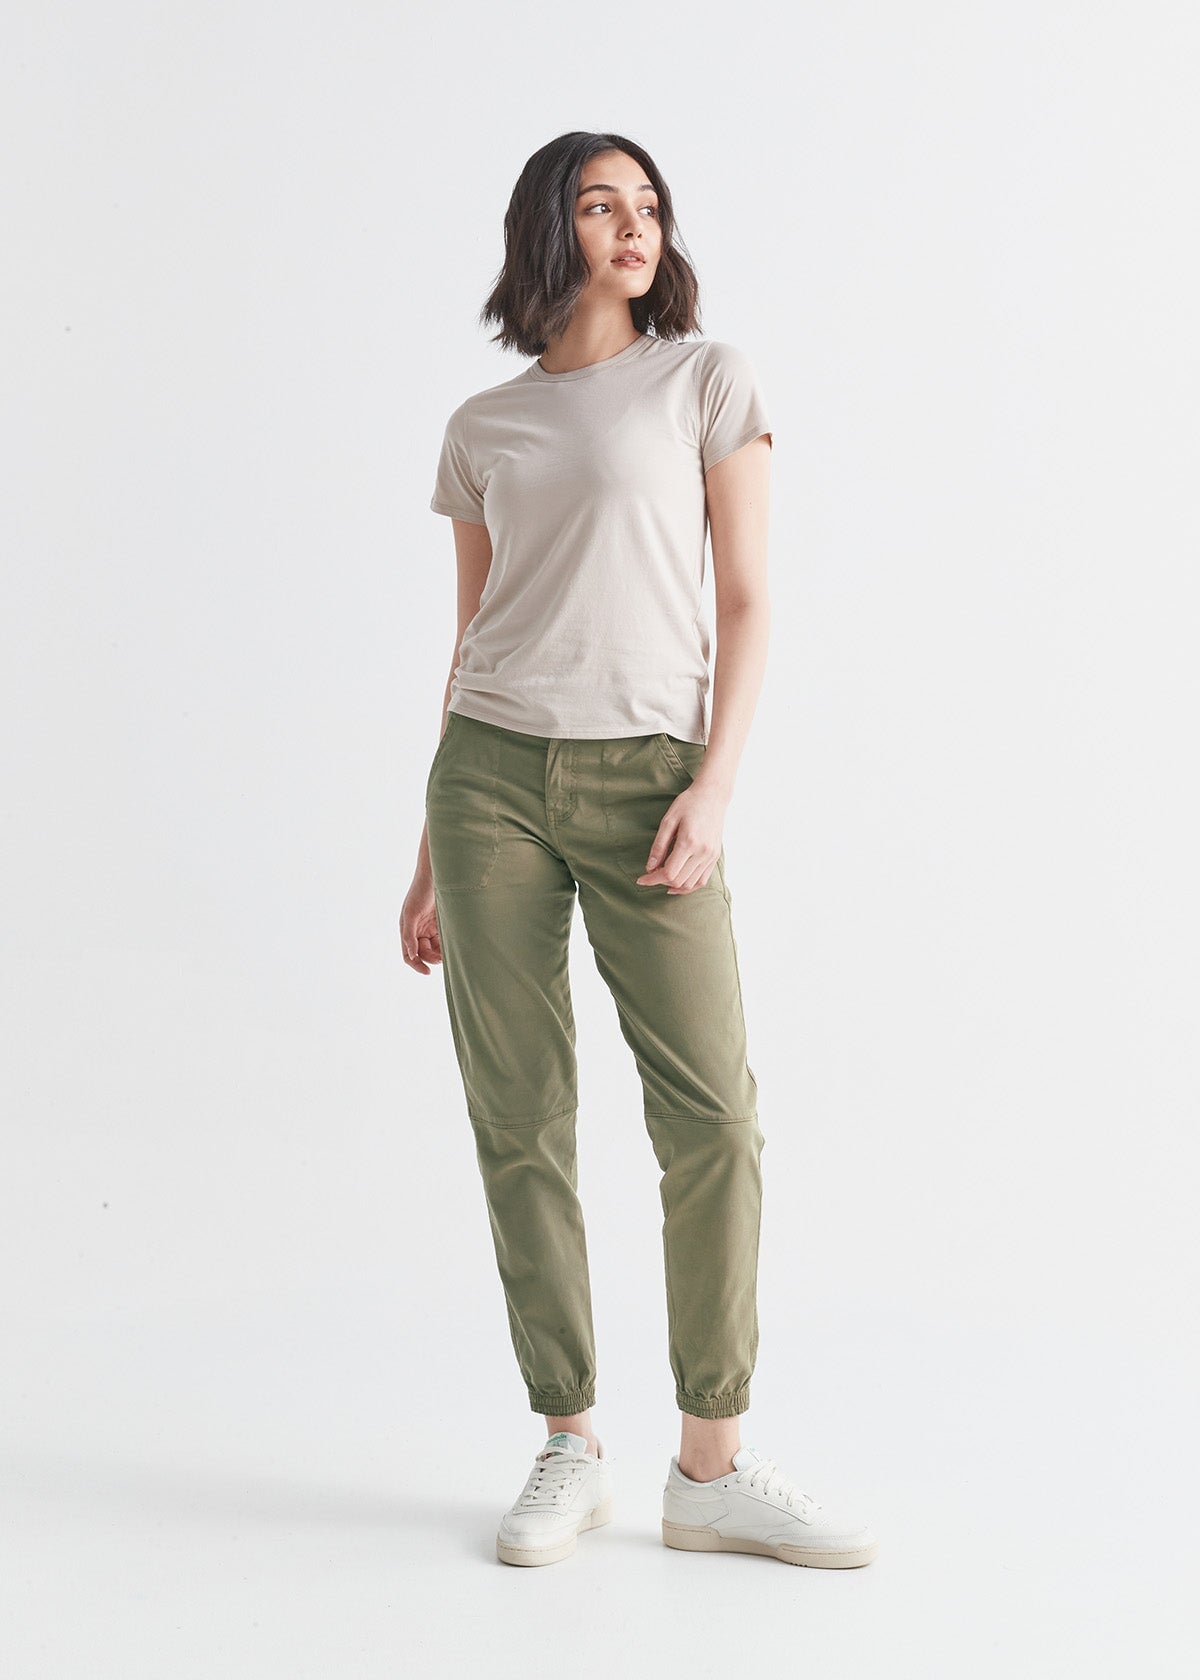 Women's Jogger Pants in Olive Green – OliveUs Apparel